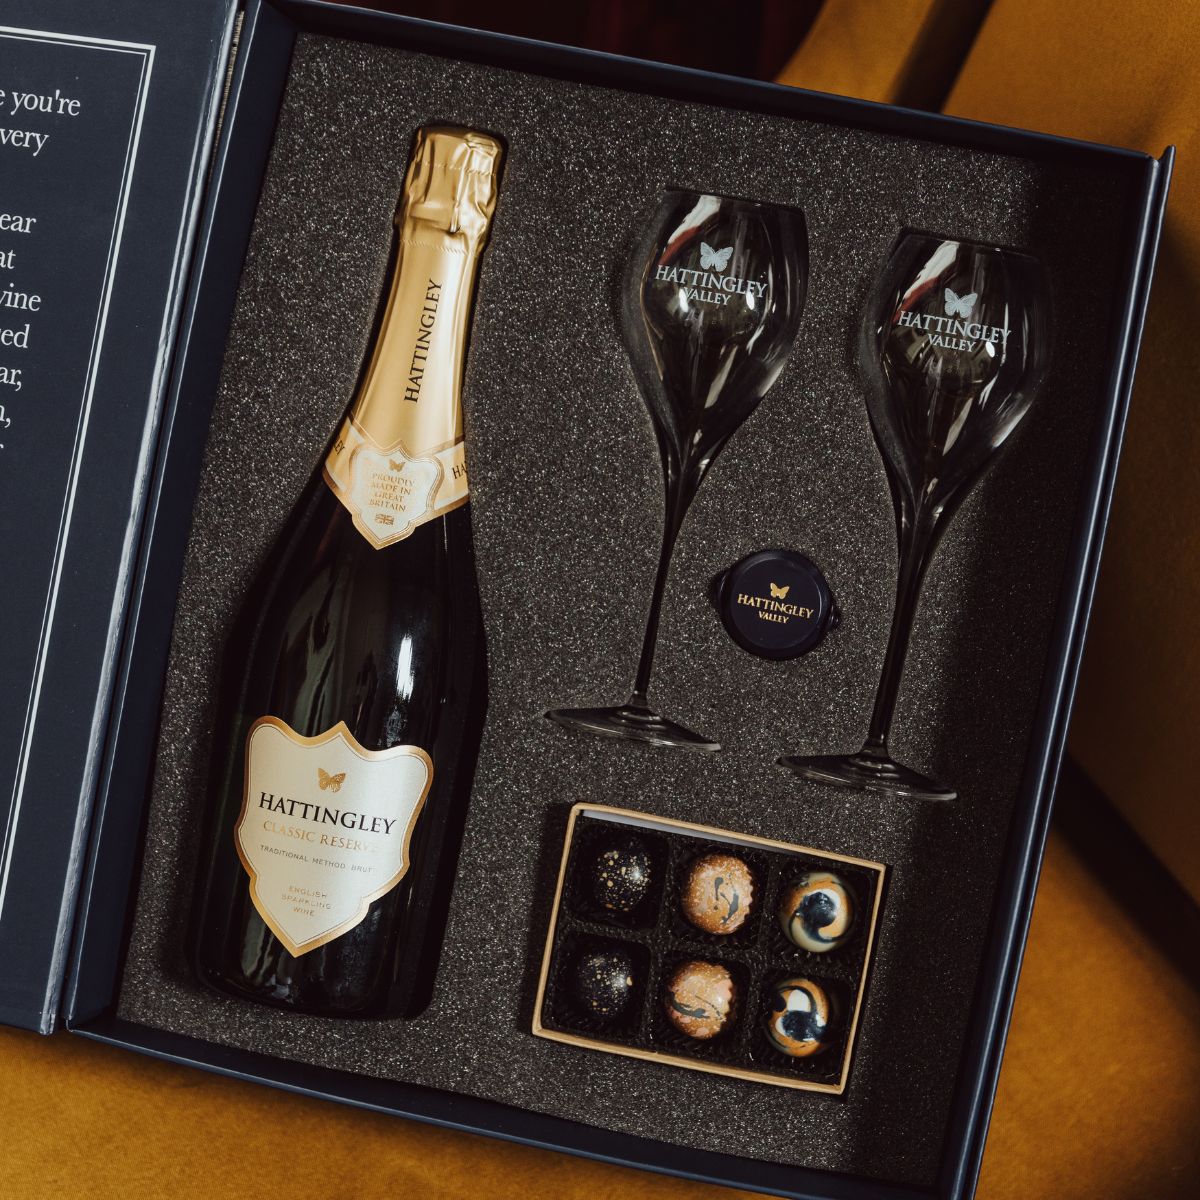 Hattingley Valley Corporate Gift Set, bottle of Hattingley Valley Classic Reserve with two glass flutes and a box of chocolates in a gift box, deliver to your door